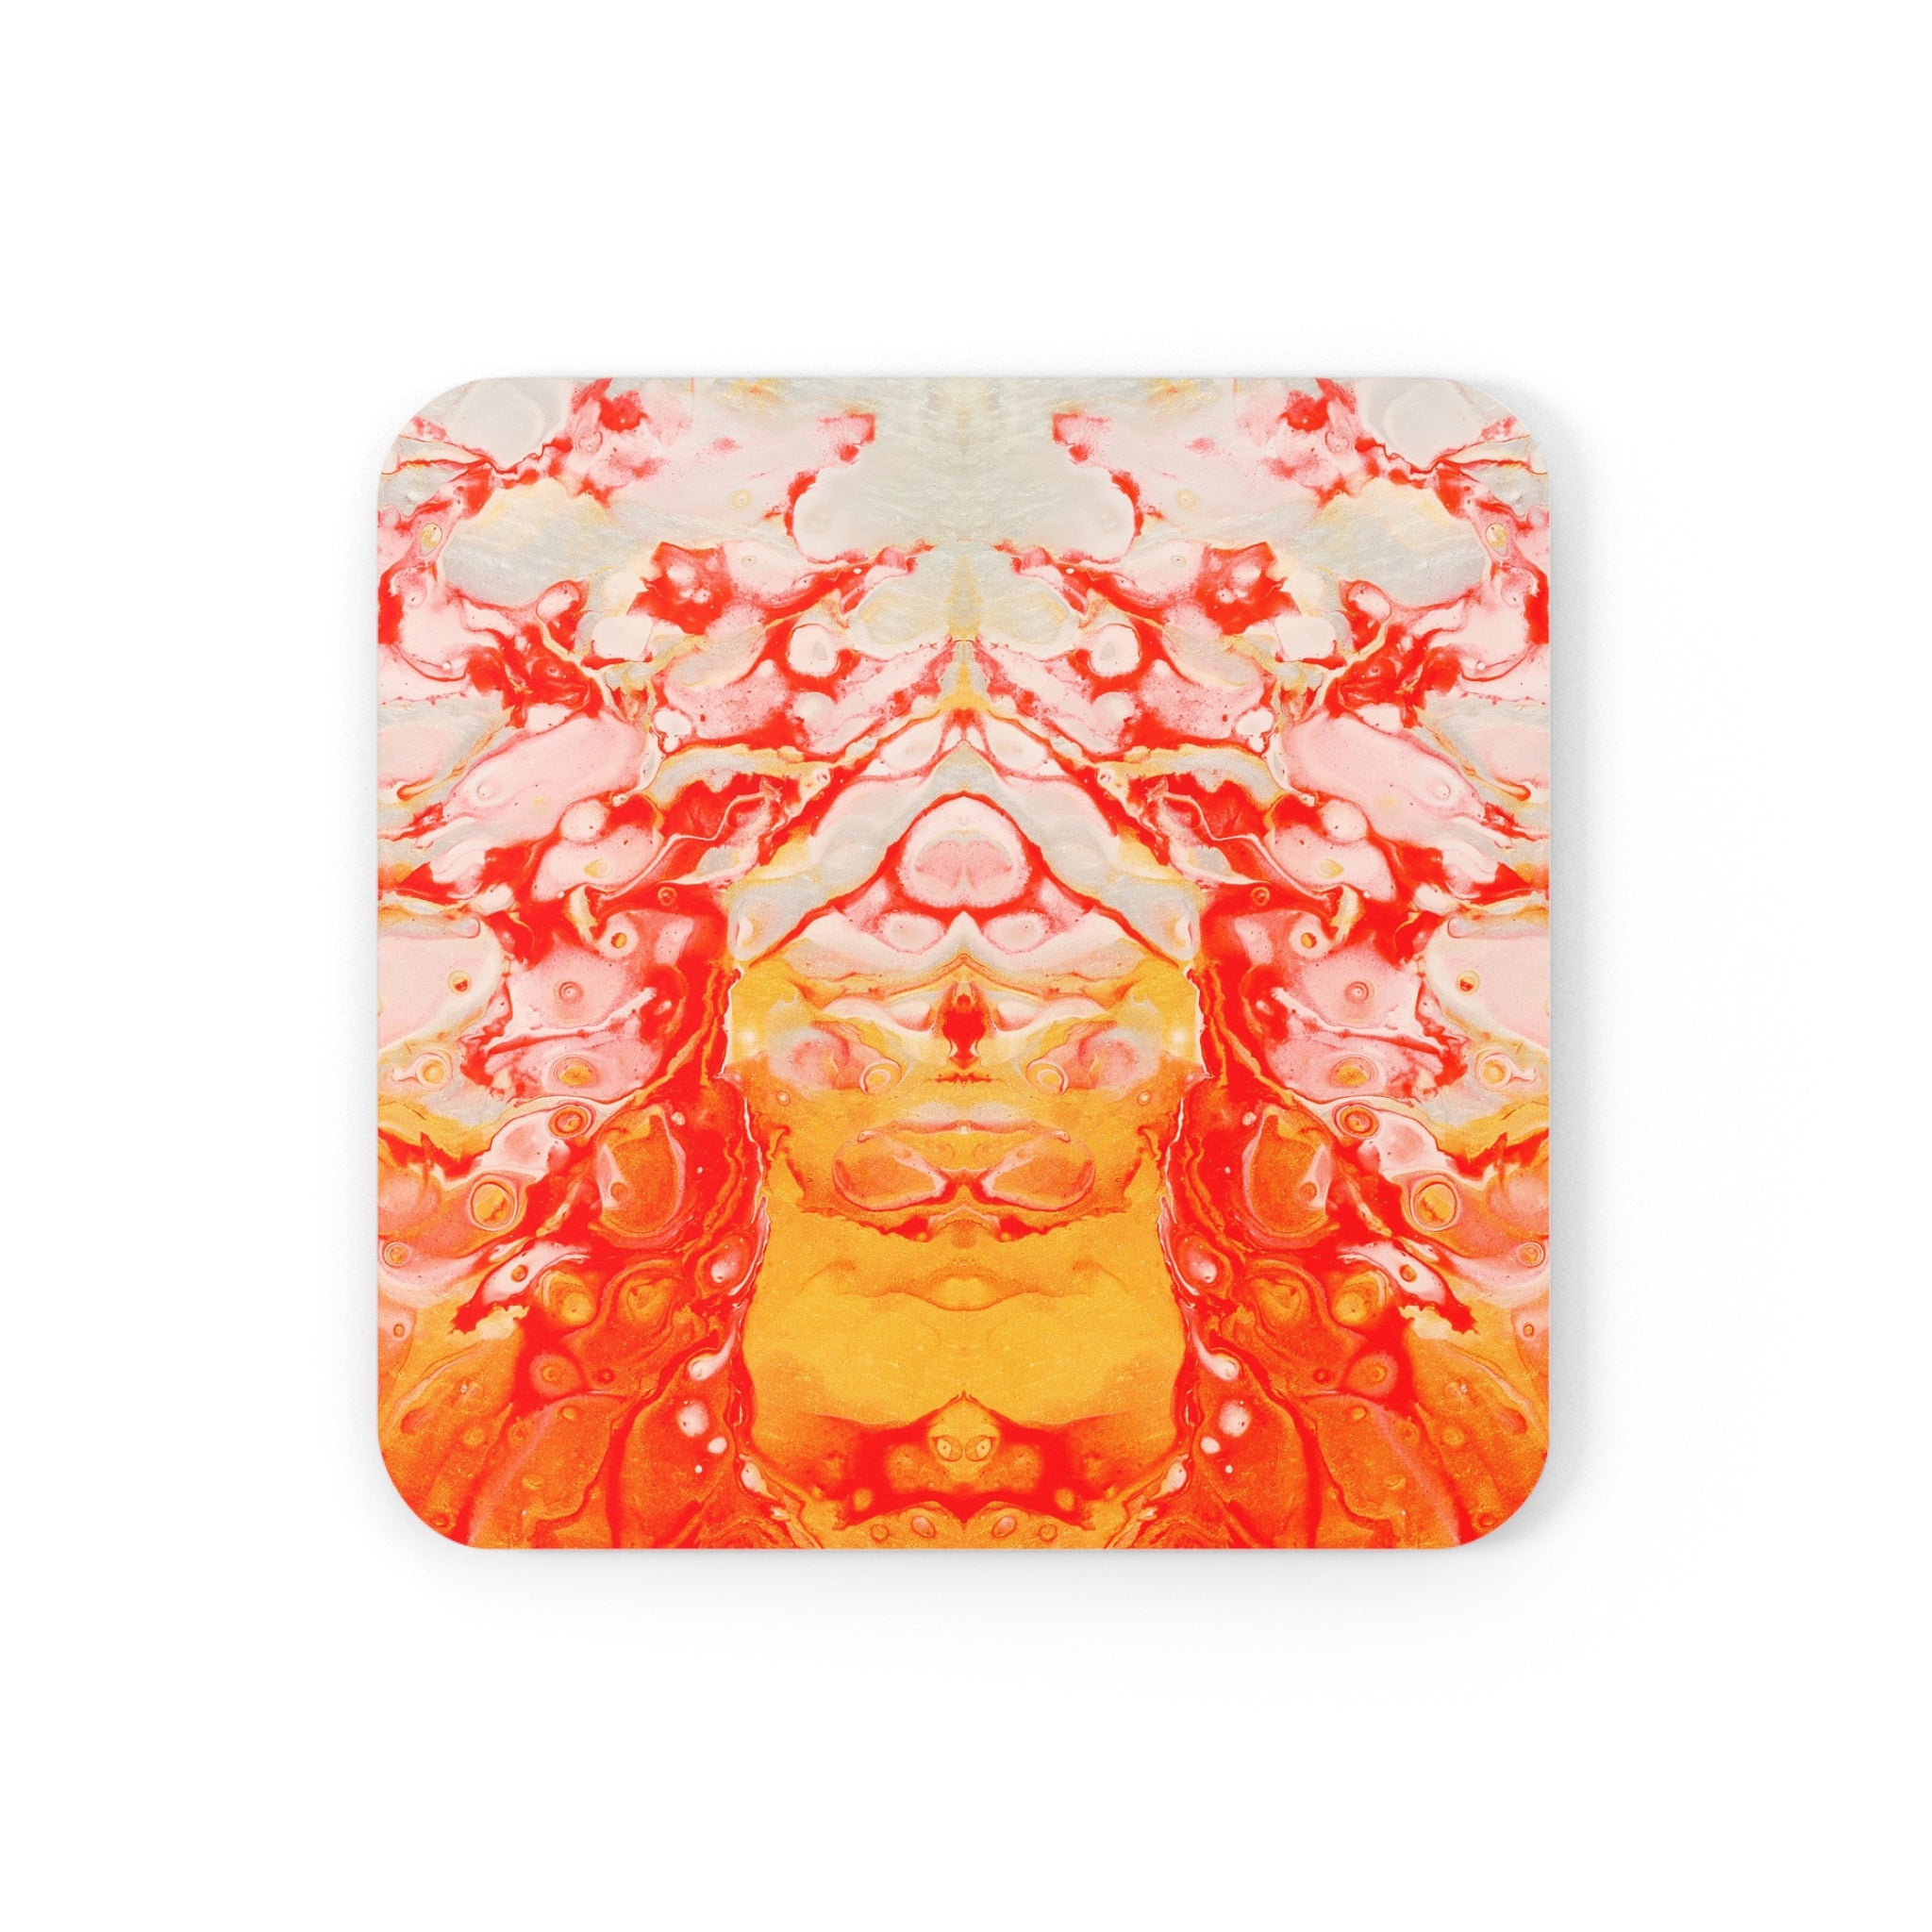 Cameron Creations - Frog Tree - Stylish Coffee Coaster - Square Front